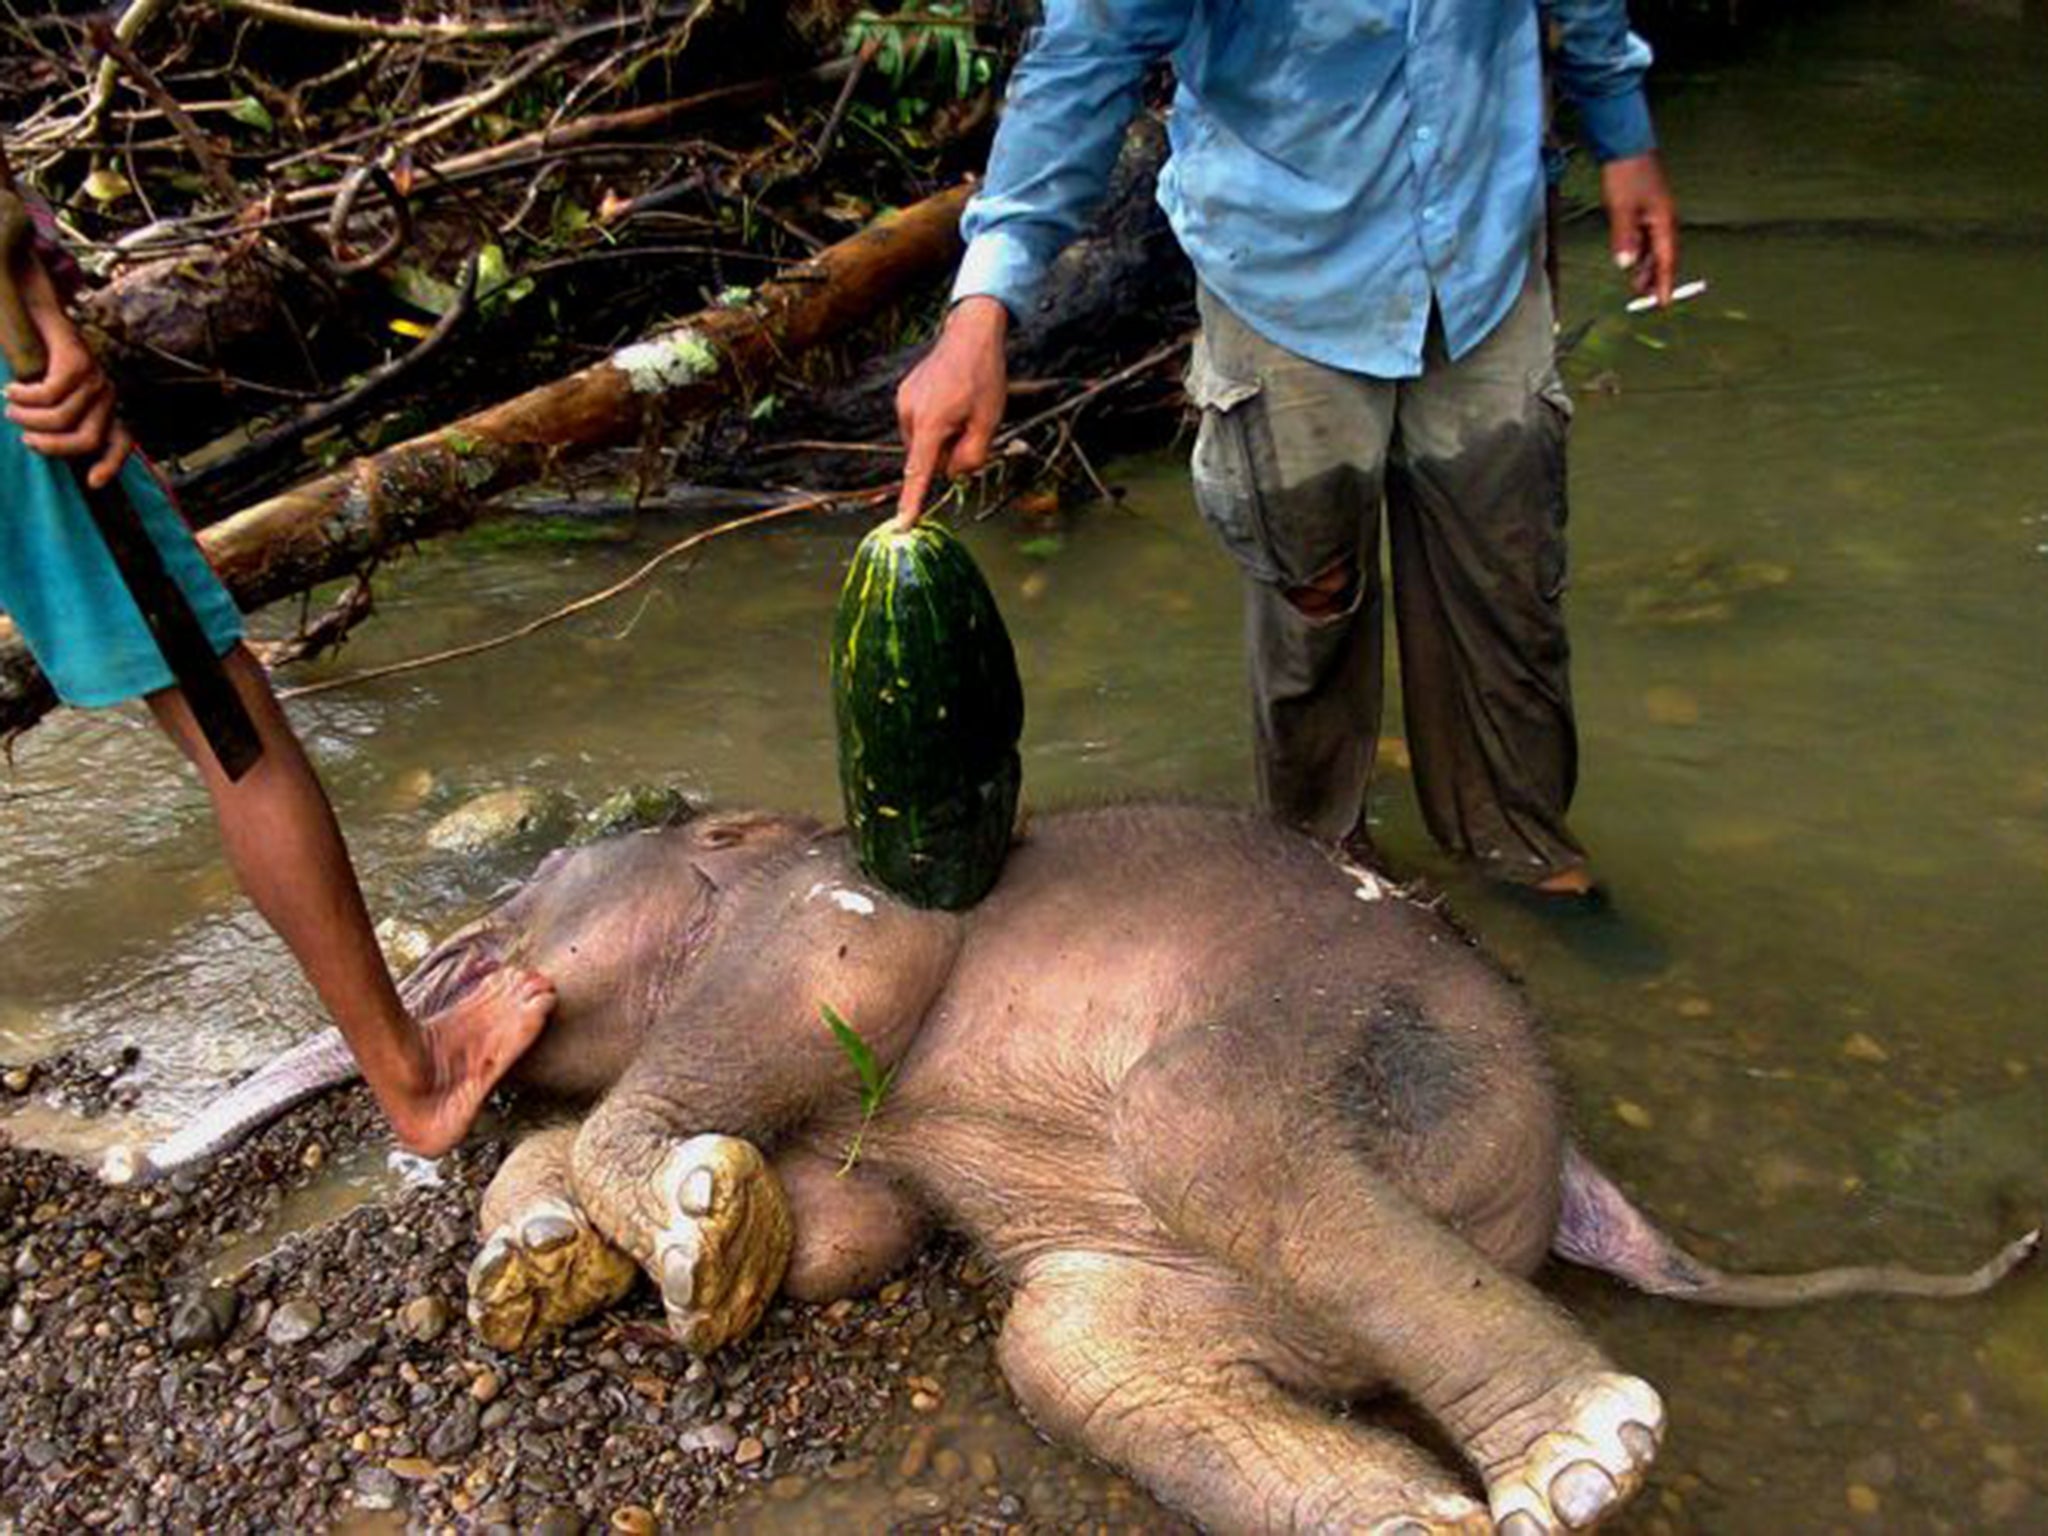 According to wildlife officials, dozens of Sumatran elephants have died after being poisoned